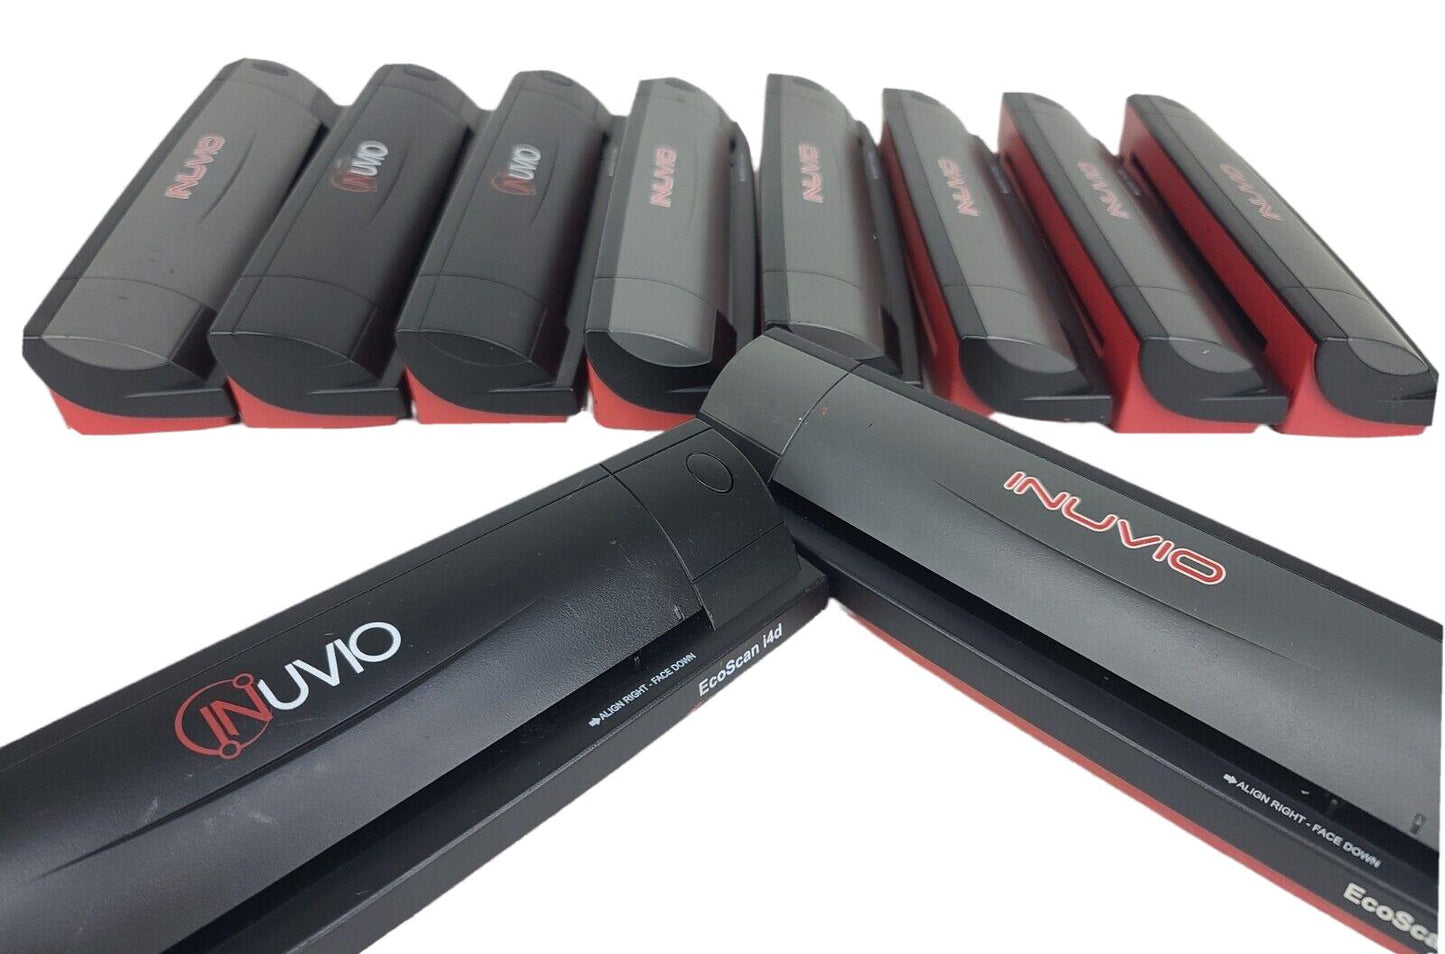 Lot of 10. INUVIO EcoScan I4D Duplex Sheetfed Scanner 600 DPI.